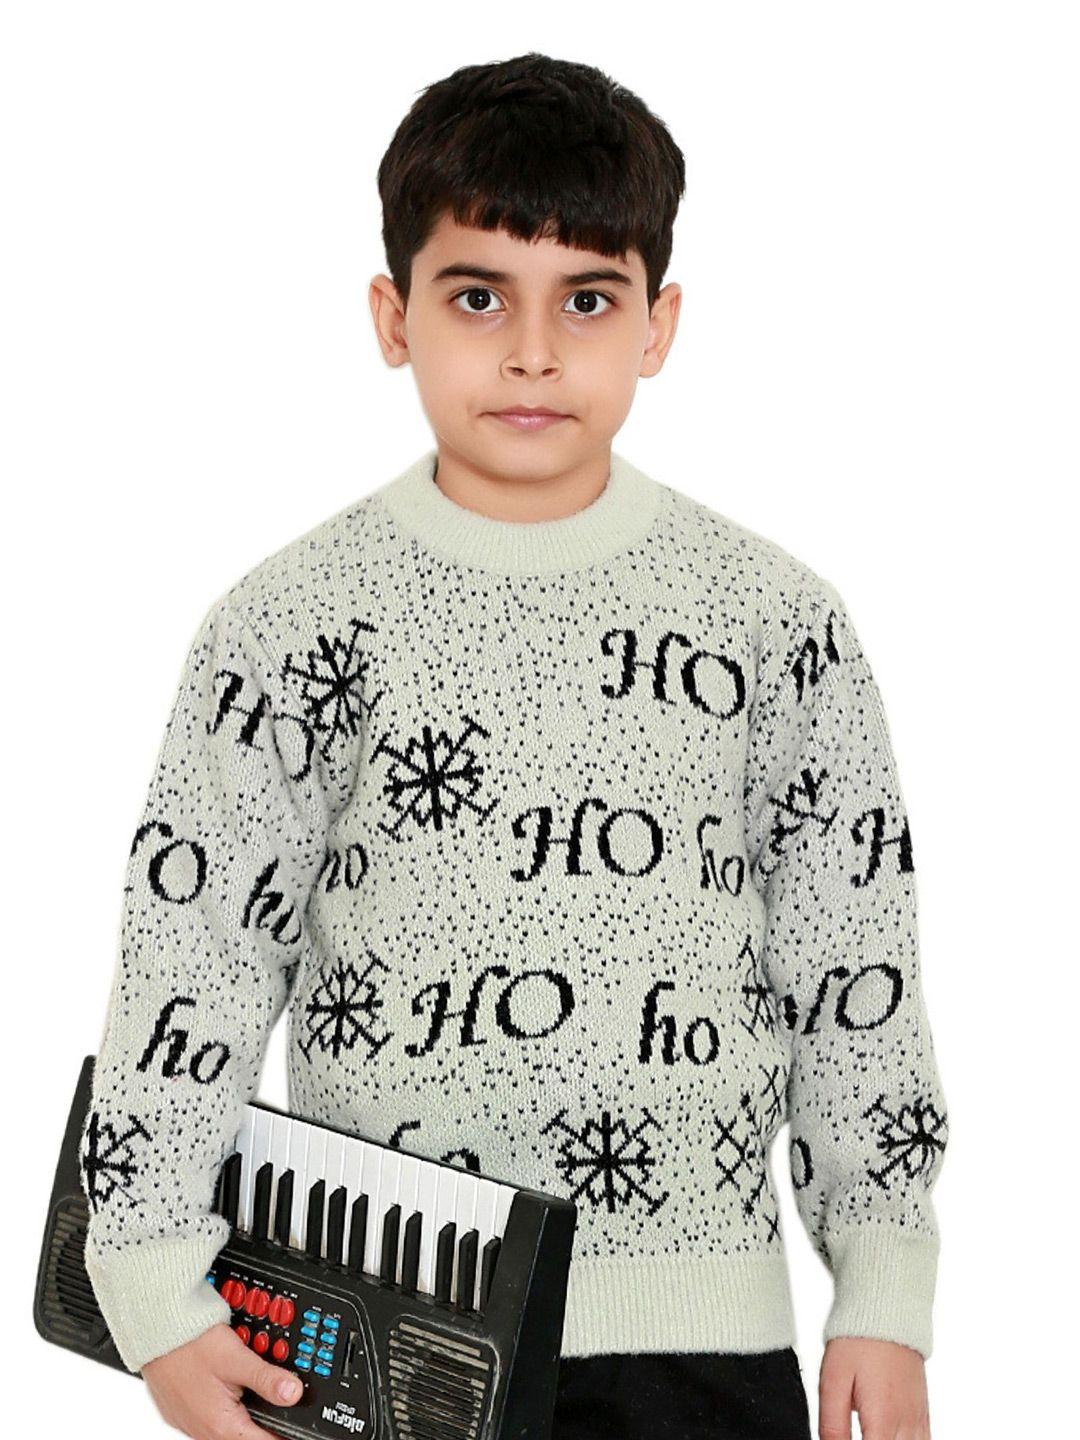 baesd boys typography printed ribbed round neck full sleeves acrylic sweater vest